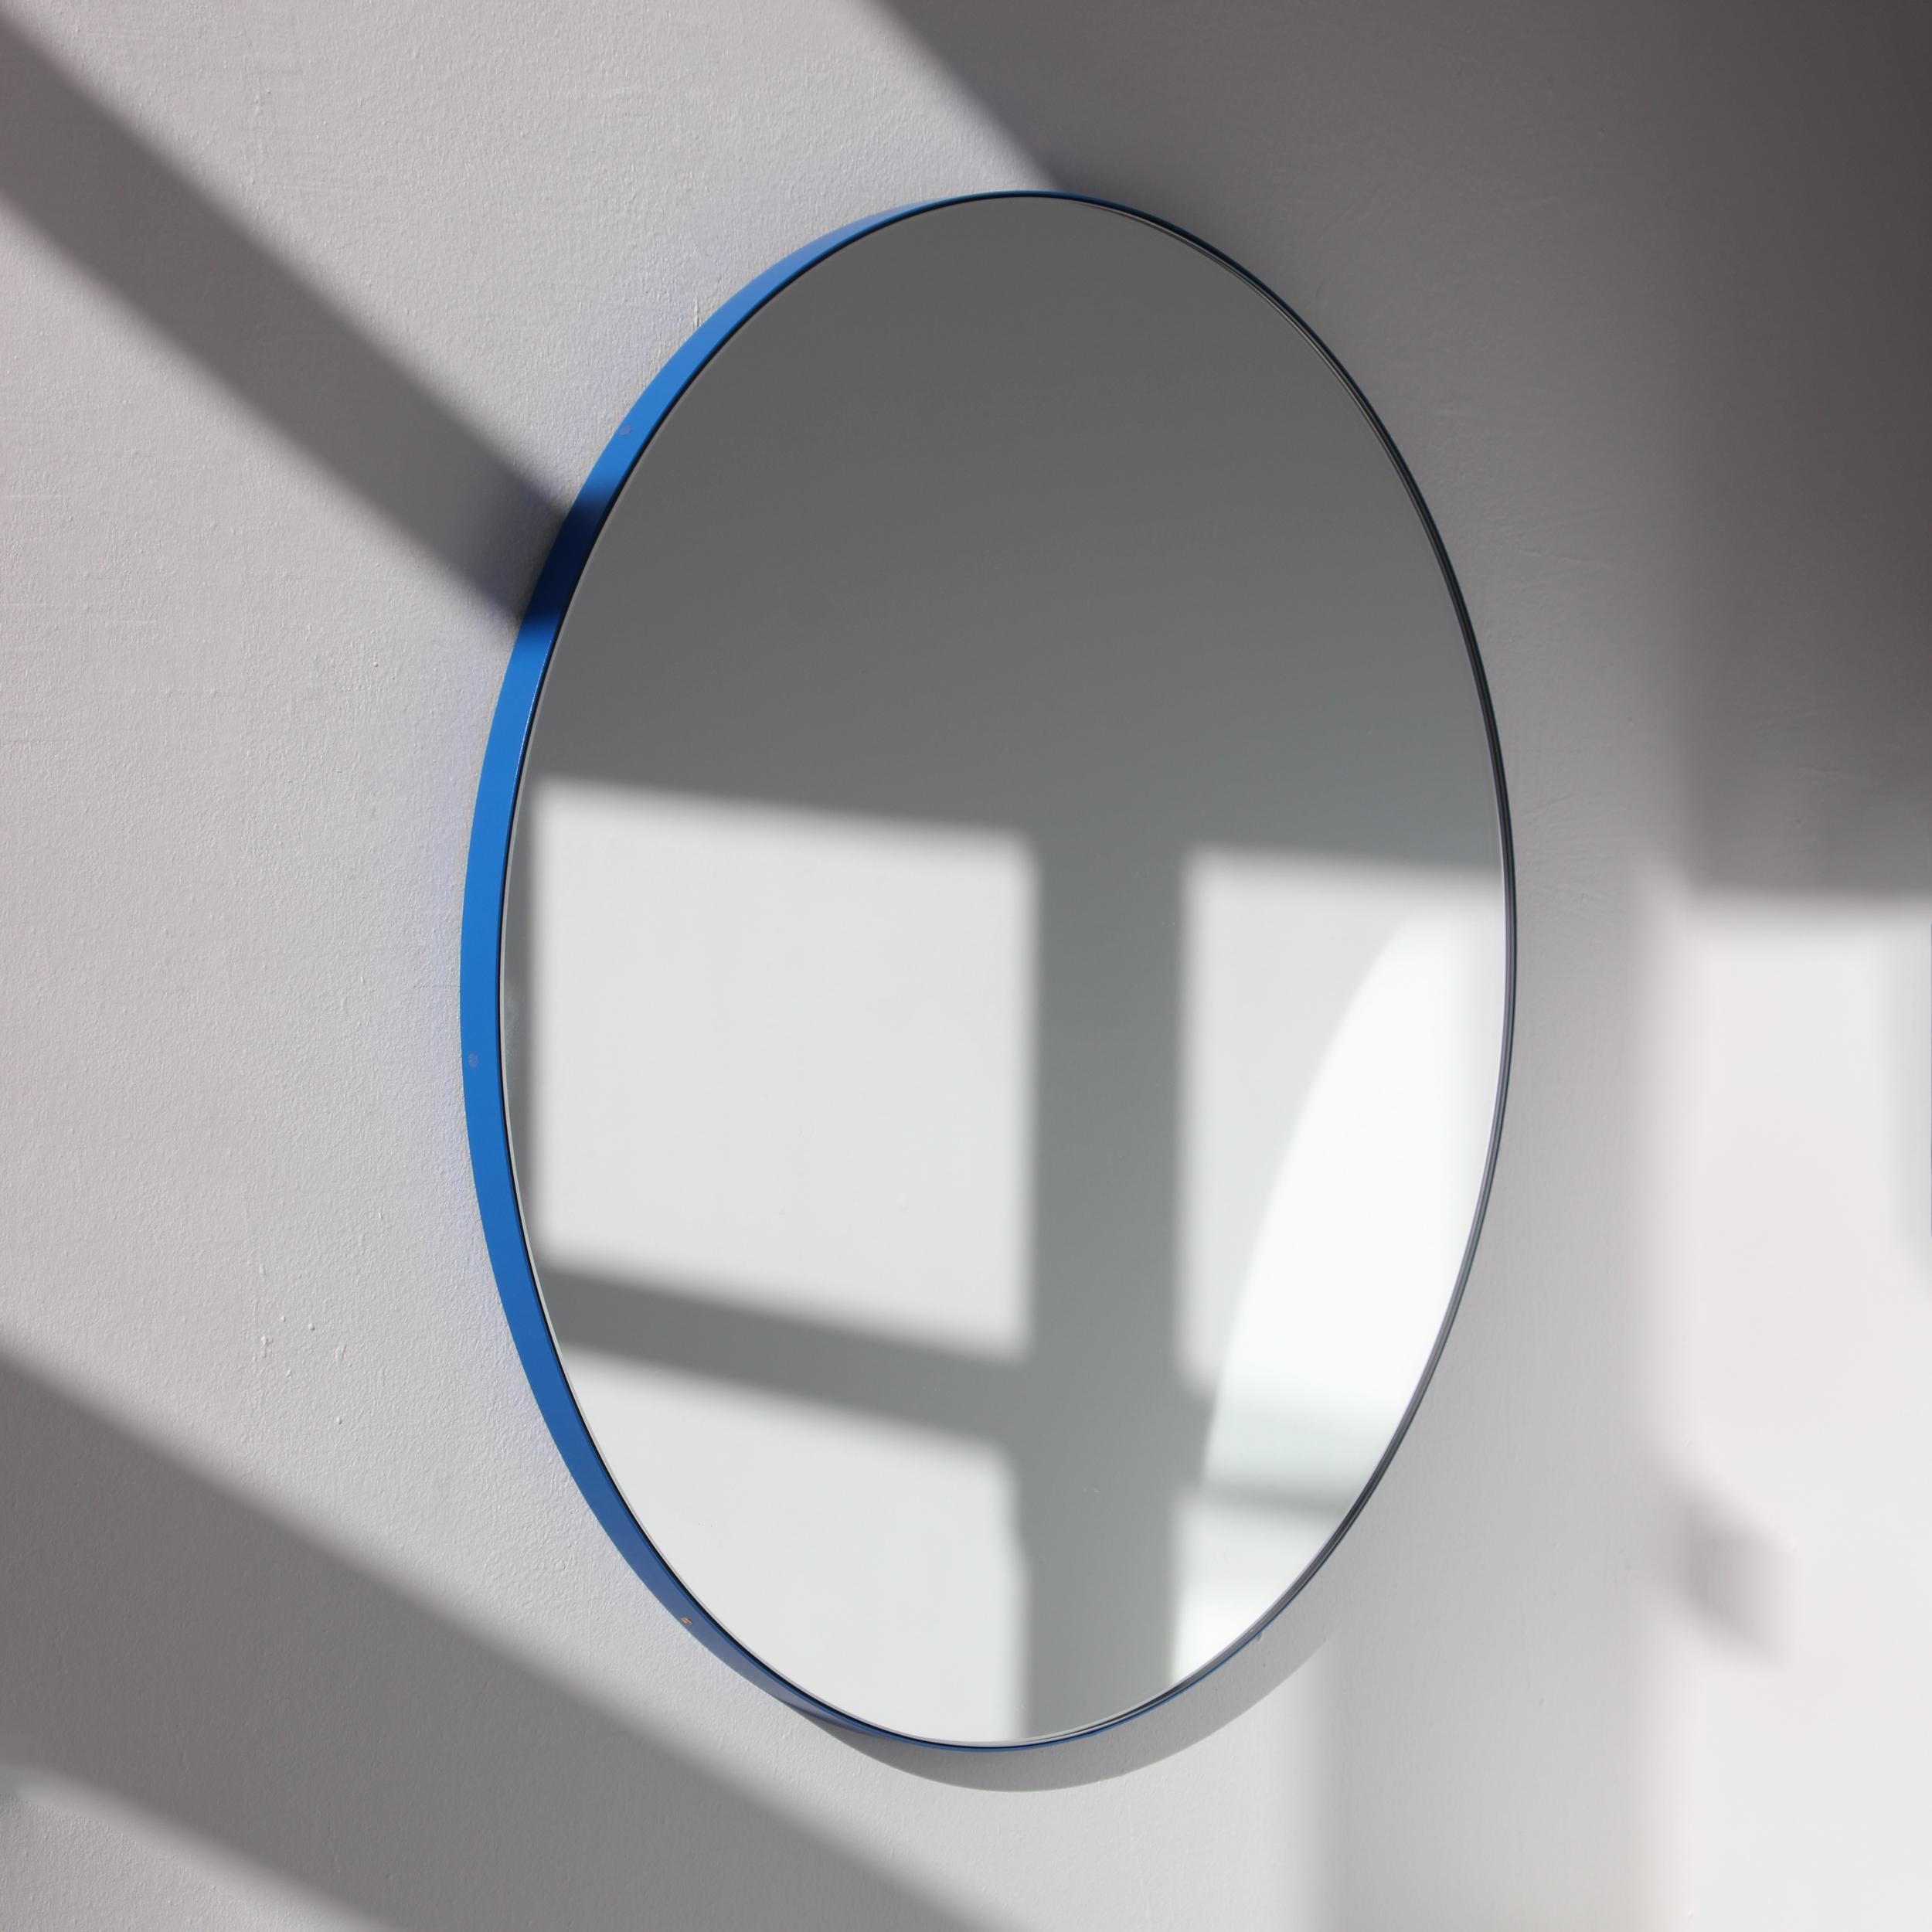 Modern round mirror with a vibrant powder coated aluminium blue frame. Designed and handcrafted in London, UK.

Medium, large and extra-large mirrors (60, 80 and 100cm) are fitted with an ingenious French cleat (split batten) system so they may hang